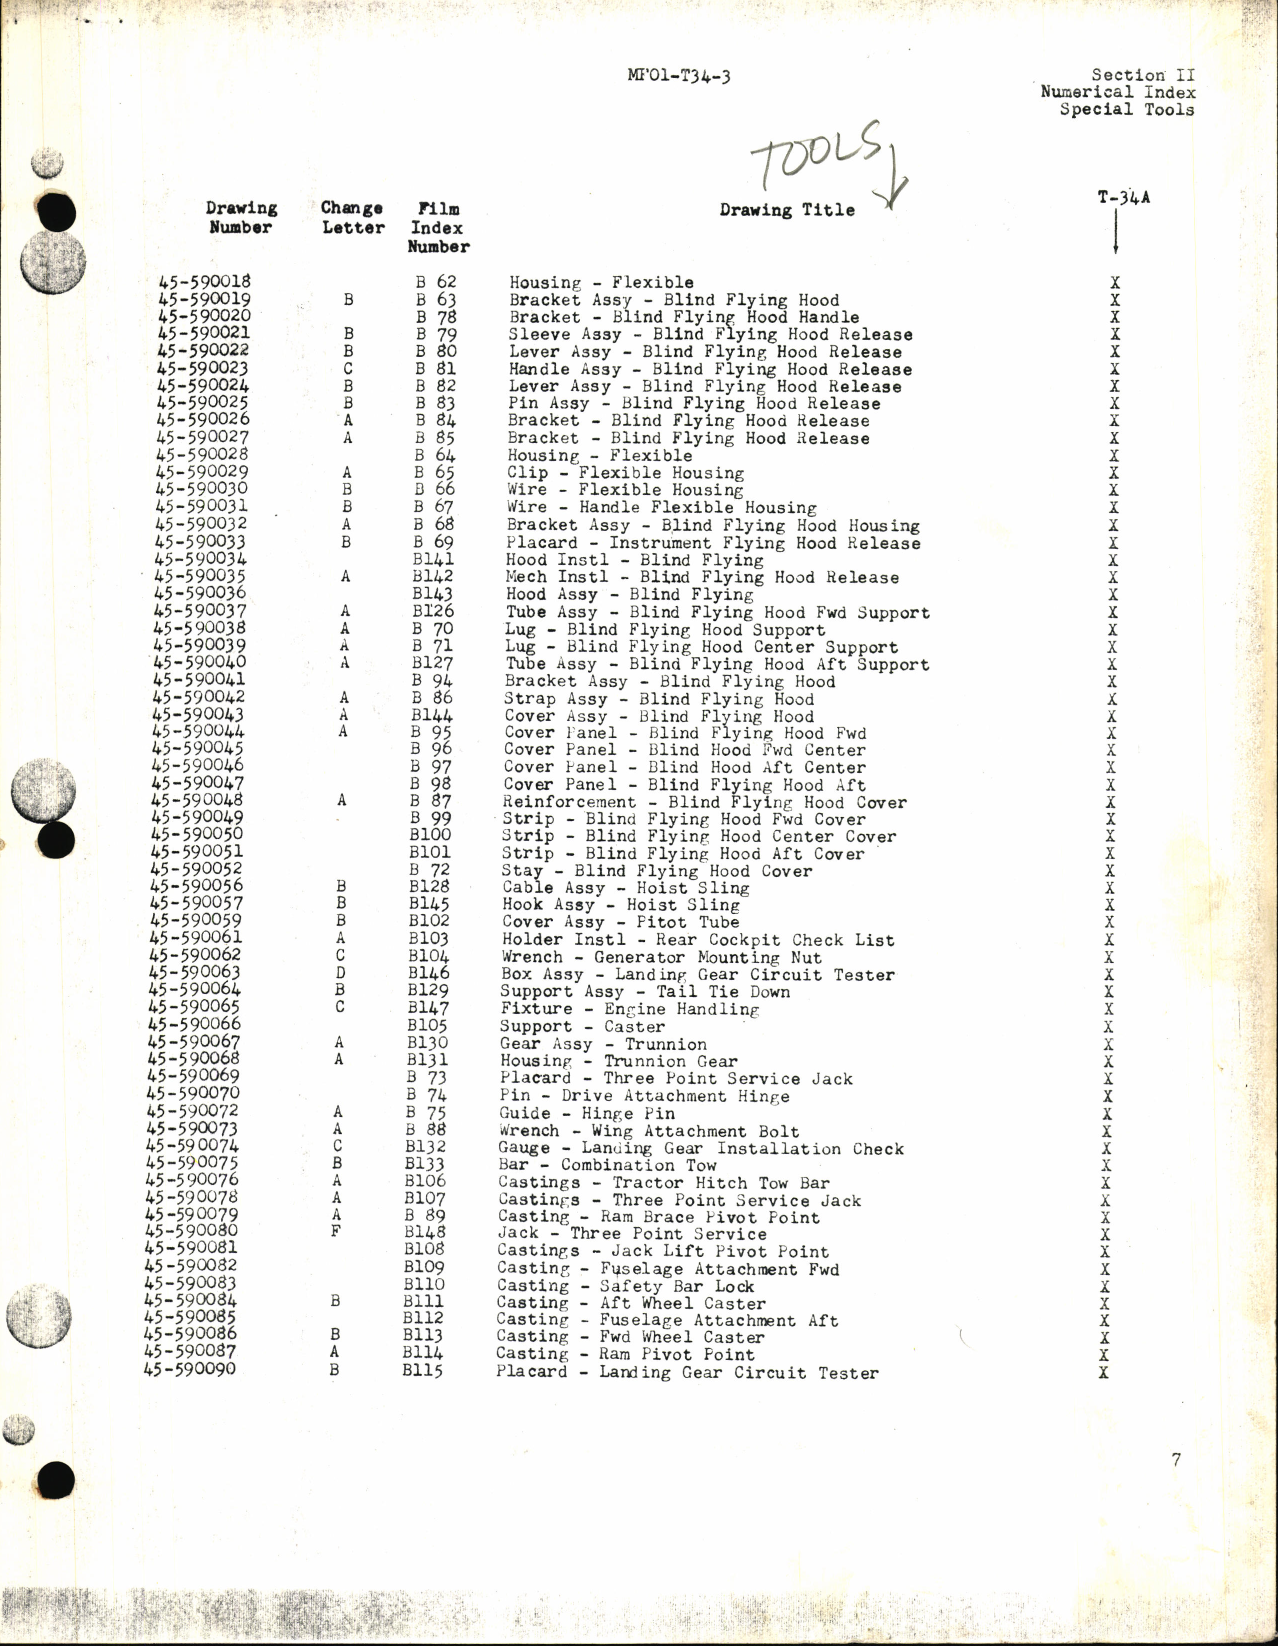 Sample page 10 from AirCorps Library document: Index of Drawings on Microfilm for T-34 Series Aircraft